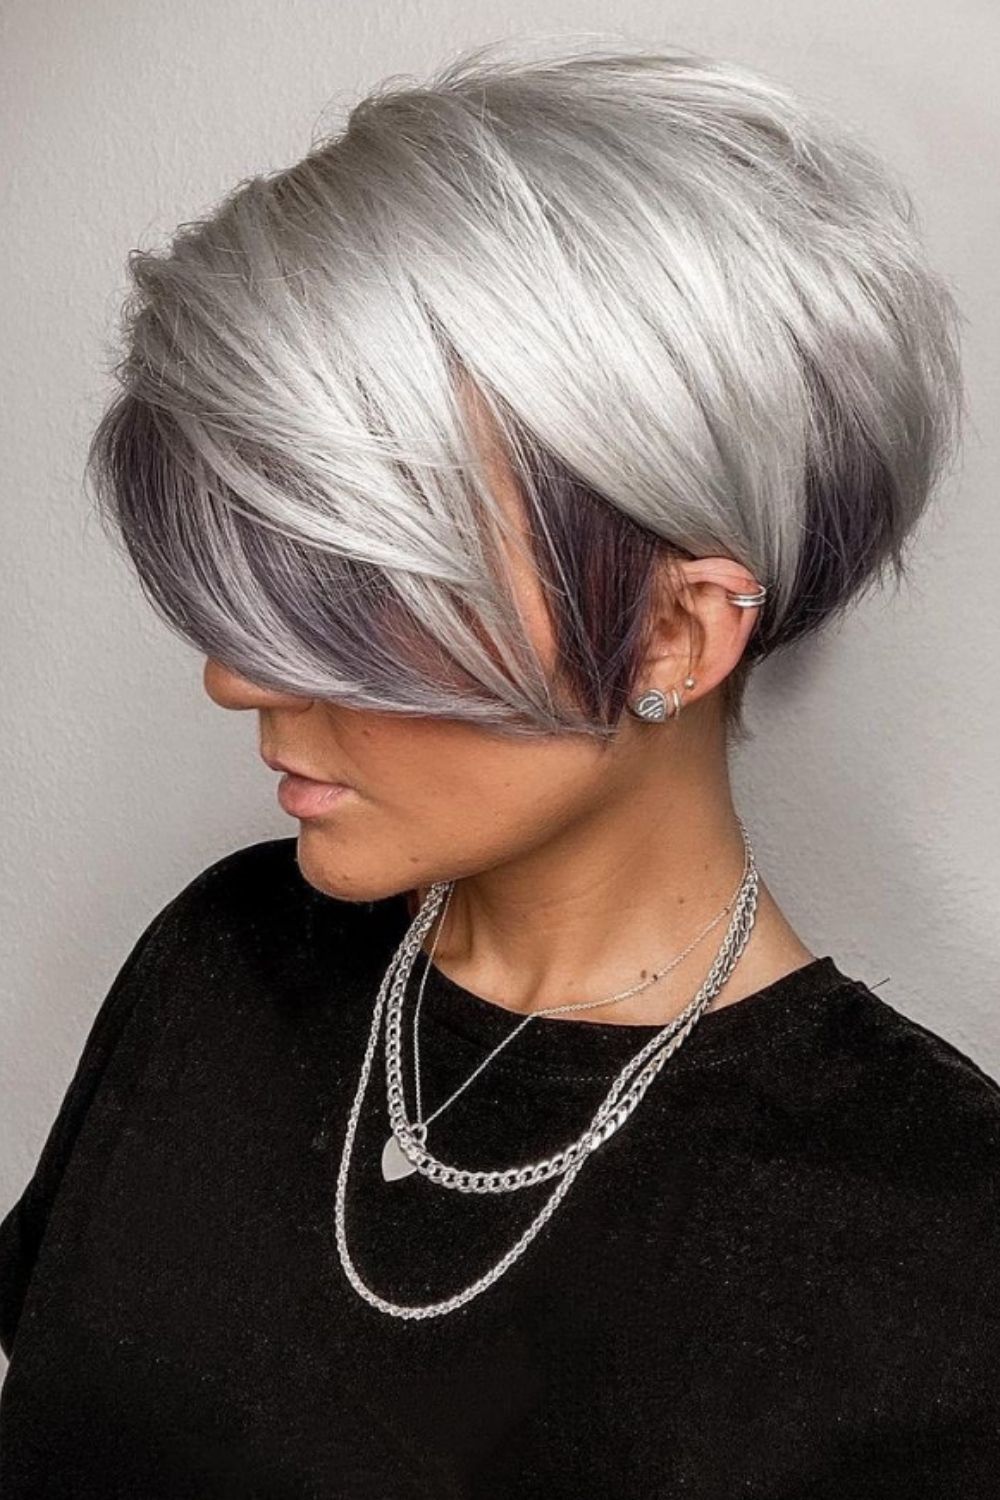 How to style women's messy short haircut and hairstyle 2021?